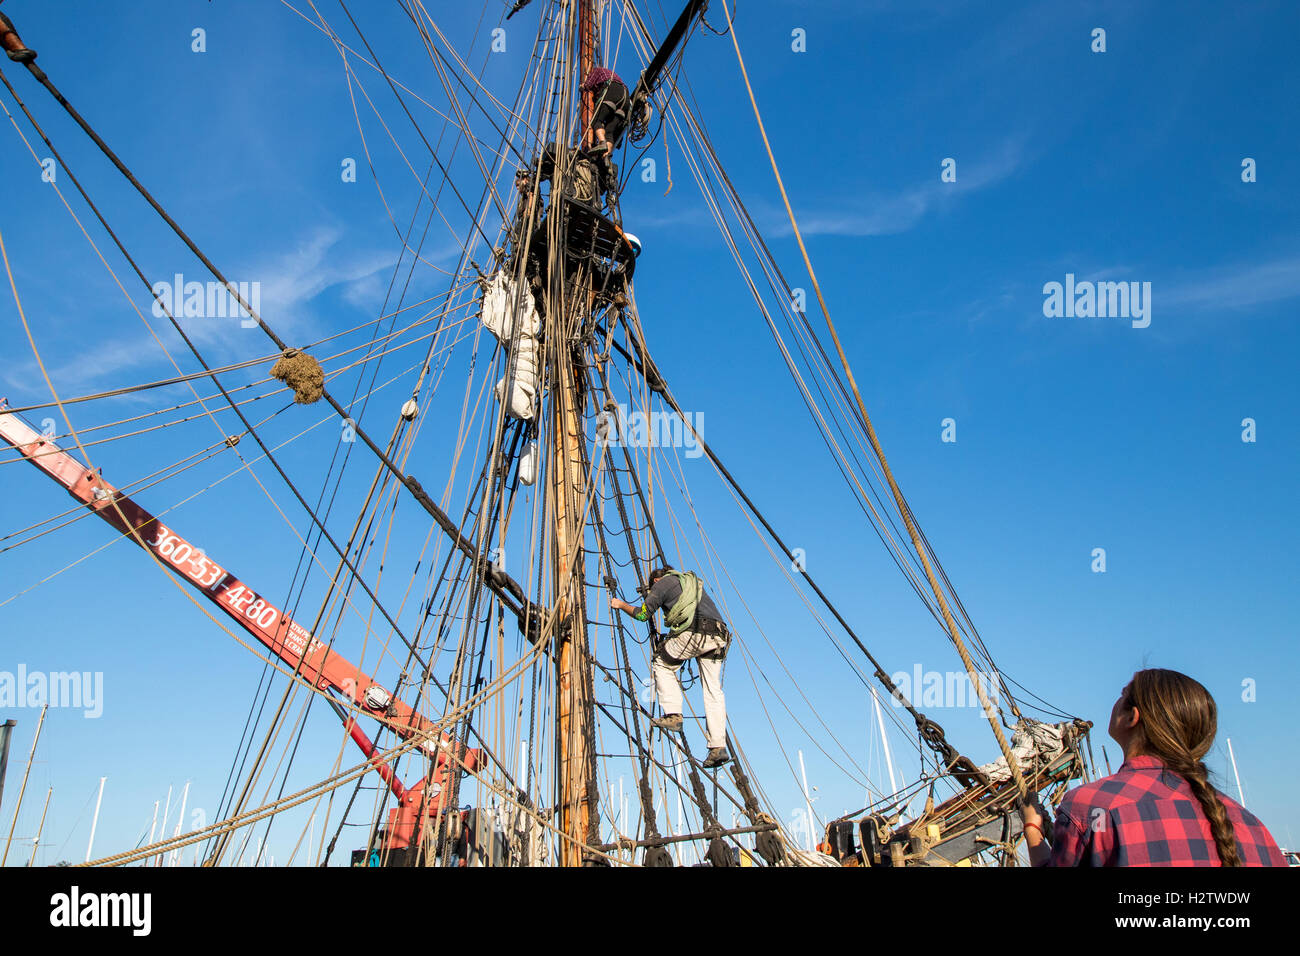 Sailboat Port Townsend mast and rigging of the wooden boat Lady Washington. Stock Photo